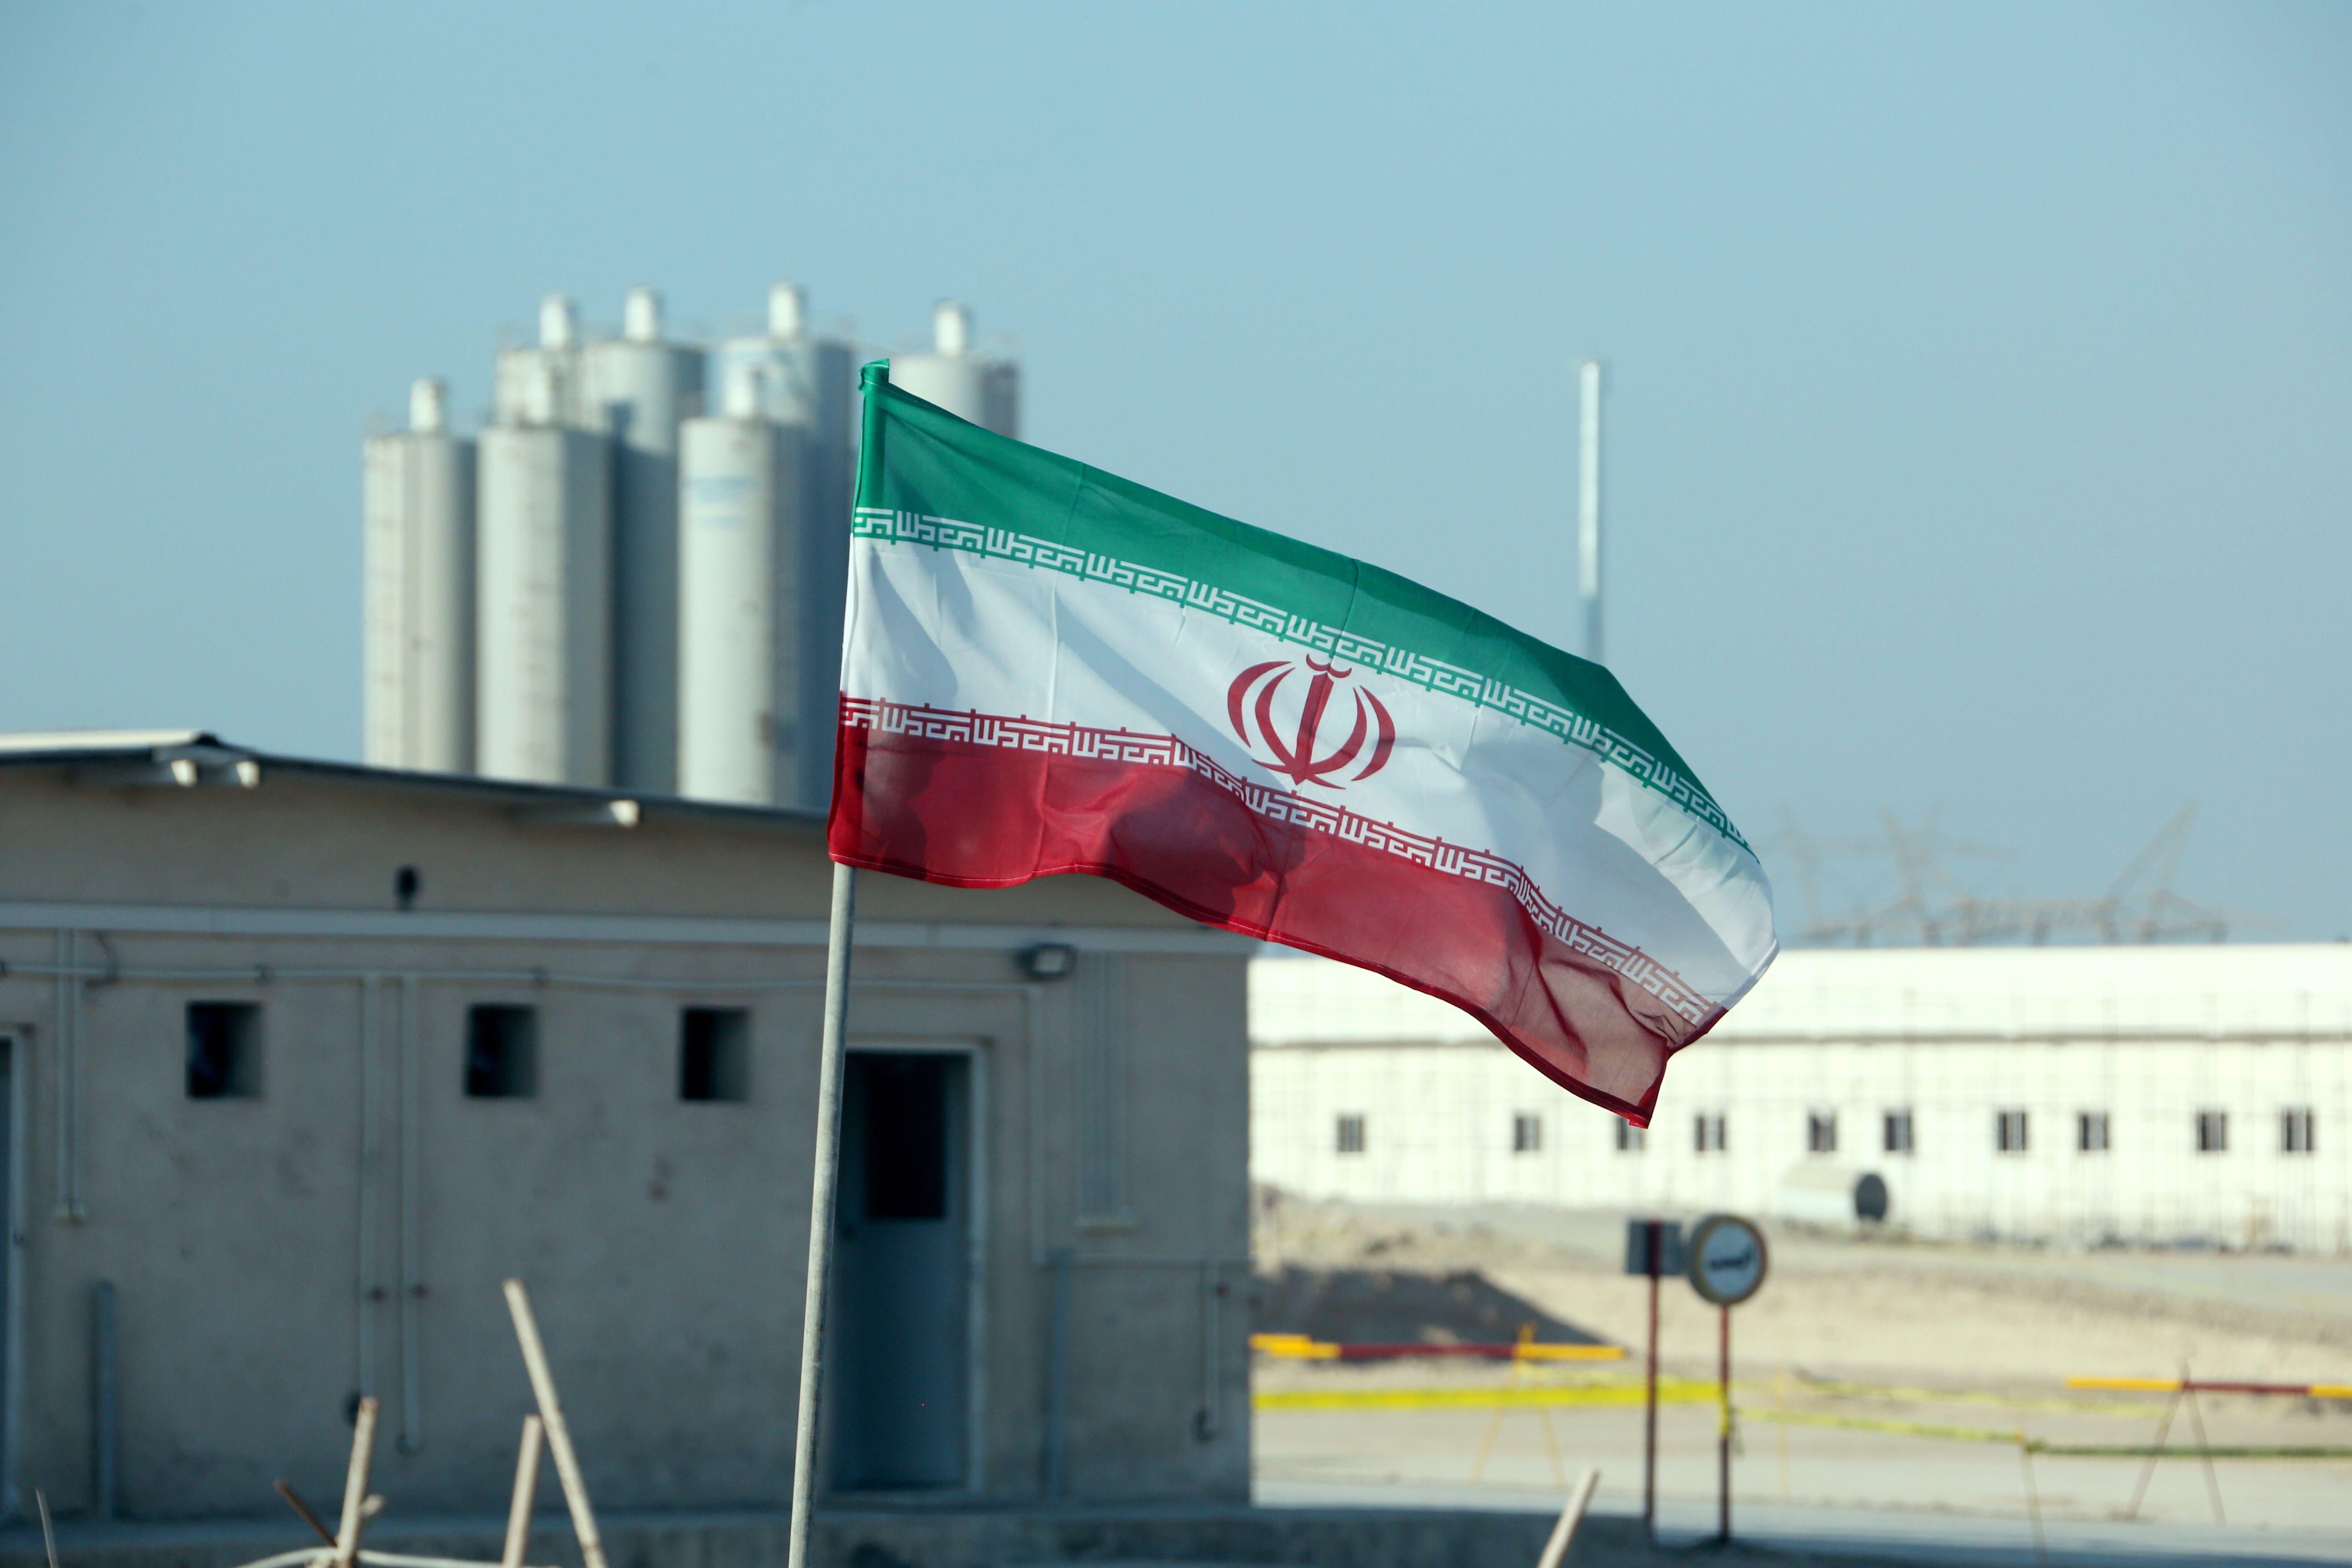 An Iranian flag flying in front of a nuclear power plant.